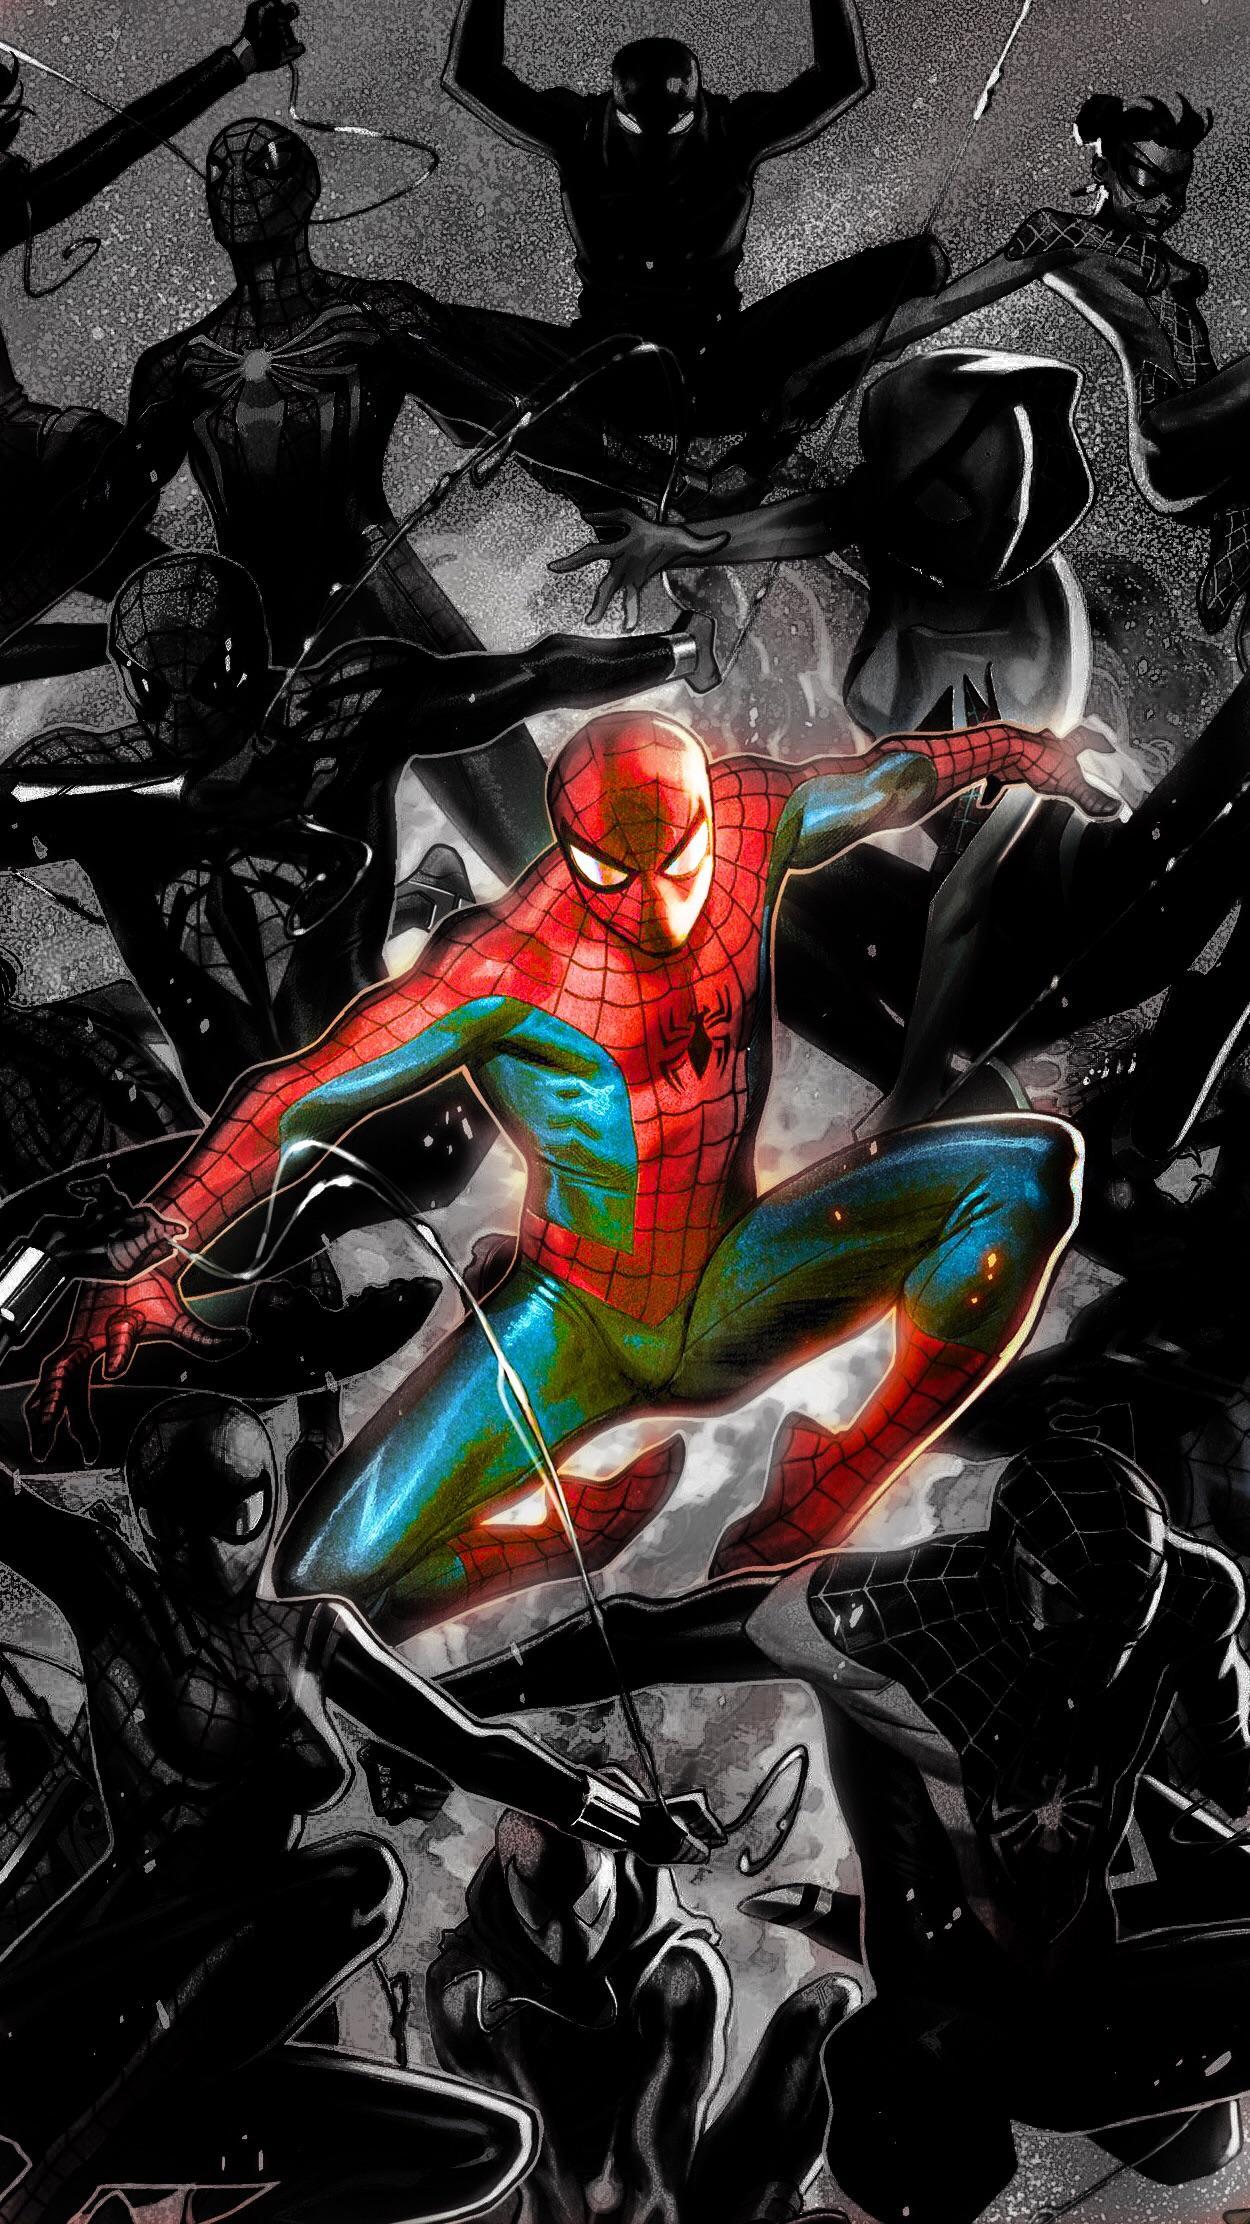 Edited The Spider Geddon Cover For A Wallpaper. Link Is In